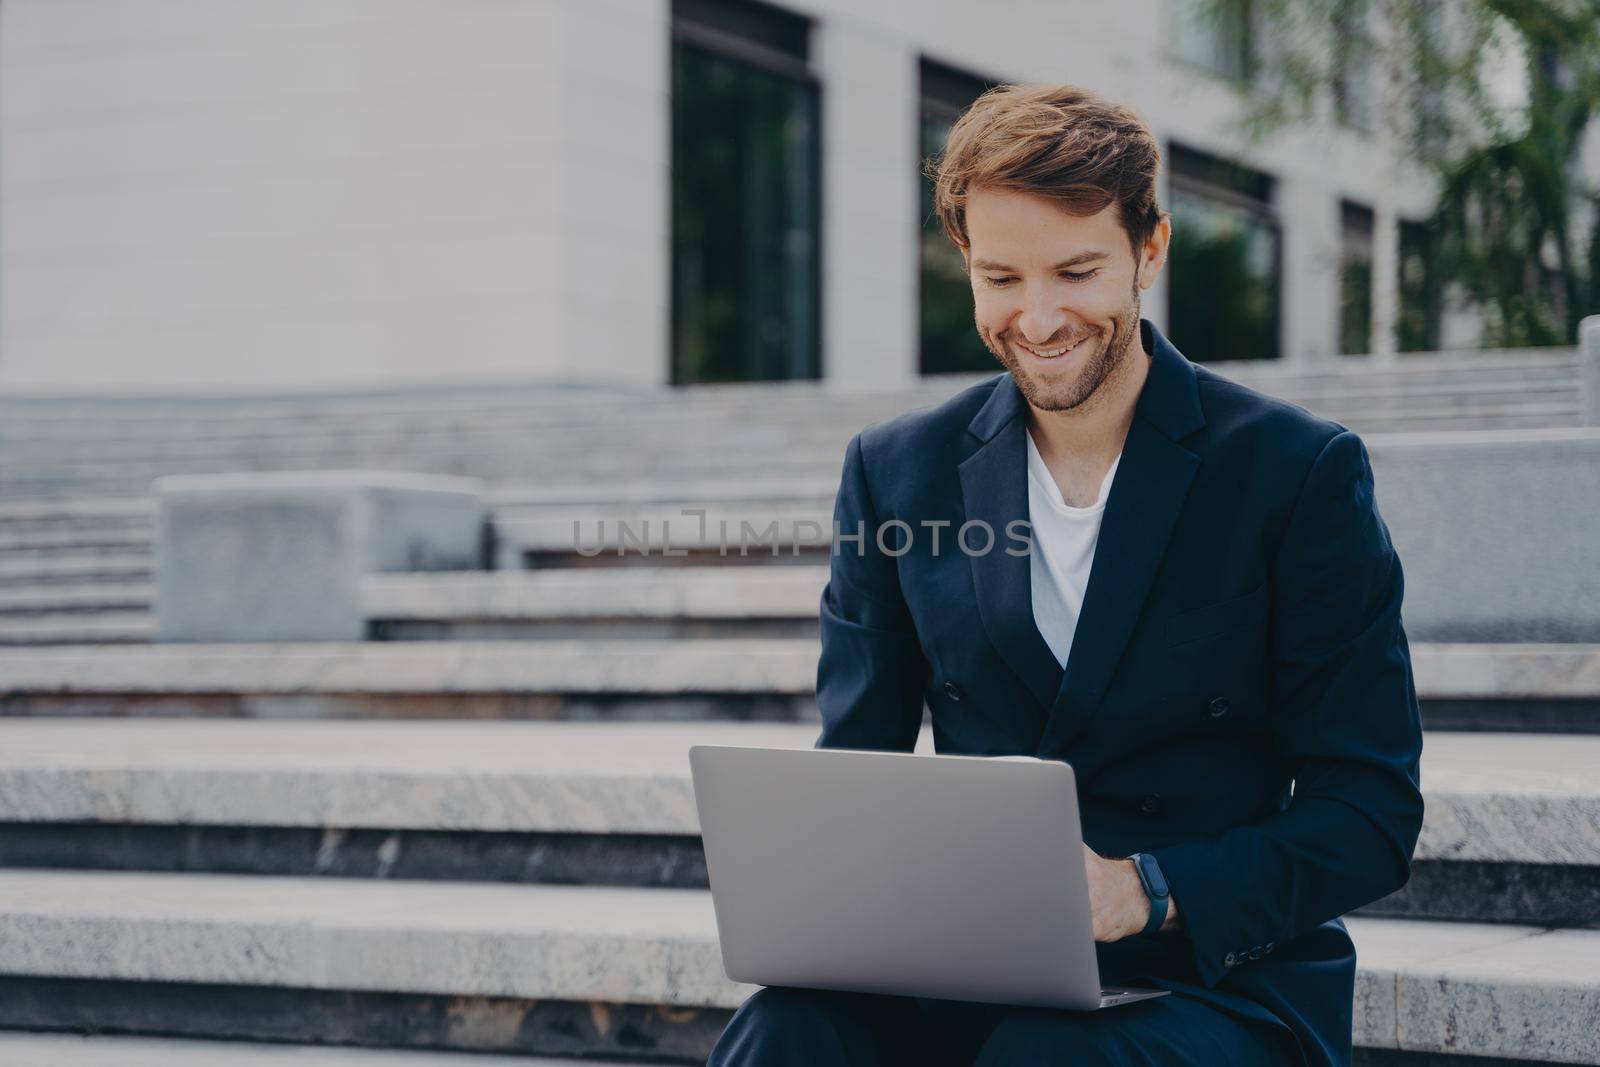 Young businessman sits on steps uses laptop organizes meeting online with investors has happy expression uses free internet poses outdoor dressed formally. Corporate director analyzes web information